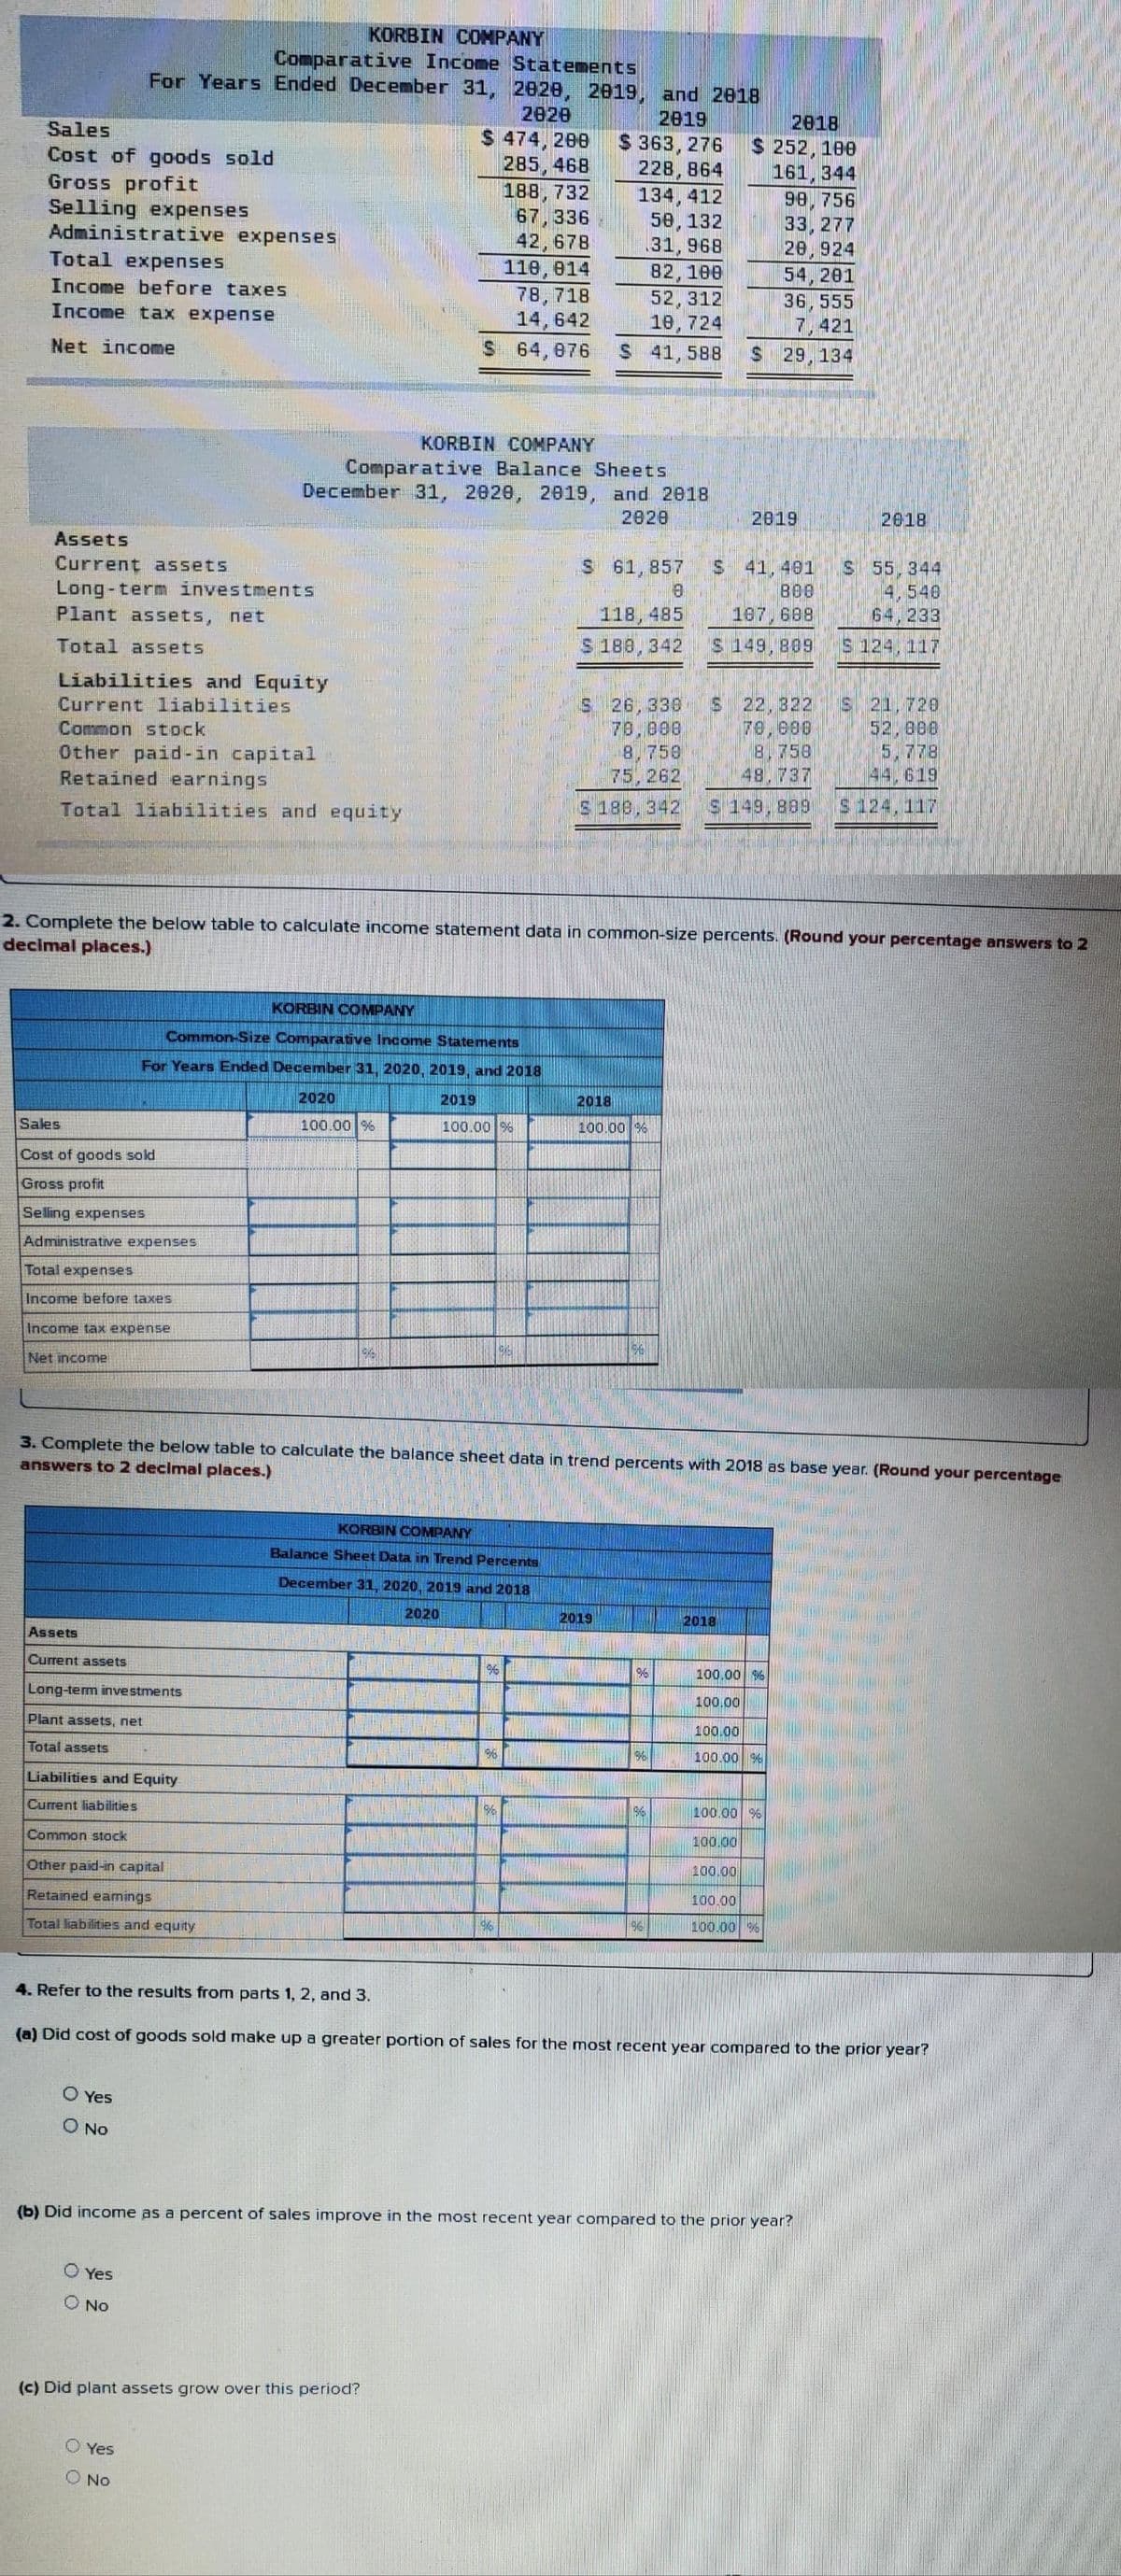 Sales
Cost of goods sold
Gross profit
Selling expenses
Administrative expenses
Total expenses
Income before taxes
Income tax expense
Net income
Assets
Current assets
KORBIN COMPANY
Comparative Income Statements
For Years Ended December 31, 2020, 2019, and 2018
2020
$ 474, 200
285,468
2819
$363, 276
228,864
188, 732
134,412
67,336
50, 132
42,678
31, 968
119,014
82, 198
78, 718
52,312
14,642
19,724
$ 64,976 $ 41,588 S
Long-term investments
Plant assets, net
Total assets
Liabilities and Equity
Current liabilities
Common stock
Other paid-in capital
Retained earnings
Total liabilities and equity
Sales
Cost of goods sold
Gross profit
Selling expenses
Administrative expenses
Total expenses
Income before taxes
Income tax expense
Net income
KORBIN COMPANY
Comparative Balance Sheets
December 31, 2020, 2019, and 2018
2020
Common-Size Comparative Income Statements
For Years Ended December 31, 2020, 2019, and 2018
2020
100.00 %
2019
100.00 %
Assets
Current assets
Long-term investments
Plant assets, net
Total assets
Liabilities and Equity
Current liabilities
Common stock
Other paid-in capital
Retained earnings
Total liabilities and equity
O Yes
O No
O Yes
O NO
KORBIN COMPANY
2. Complete the below table to calculate income statement data in common-size percents. (Round your percentage answers to 2
decimal places.)
Yes
O No
KORBIN COMPANY
Balance Sheet Data in Trend Percents
December 31, 2020, 2019 and 2018
2020
(c) Did plant assets grow over this period?
KOMEN
%6
96
S 61,857
8
118, 485
$ 180, 342
%
S 26,330
79,000
8, 750
75.262
$ 188,342
3. Complete the below table to calculate the balance sheet data in trend percents with 2018 as base year. (Round your percentage
answers to 2 decimal places.)
2018
100.00 %
1943
2019
96
8X6
196
96
2018
$ 252, 190
161, 344
41, 401
800
107, 688
$ 149, 809
2019
2018
98,756
33,277
20,924
54, 201
36,555
7, 421
29,134
$ 22,322
70,000
8.750
48.737
44.619
149,899 $ 124,117
100.00 96
100.00
100.00
100.00 %
100.00
100.00 %
100.00
2018
100.00
100.00 %
(b) Did income as a percent of sales improve in the most recent year compared to the prior year?
$ 55,344
4,540
64,233
4. Refer to the results from parts 1, 2, and 3.
(a) Did cost of goods sold make up a greater portion of sales for the most recent year compared to the prior year?
S 21, 720
52.880